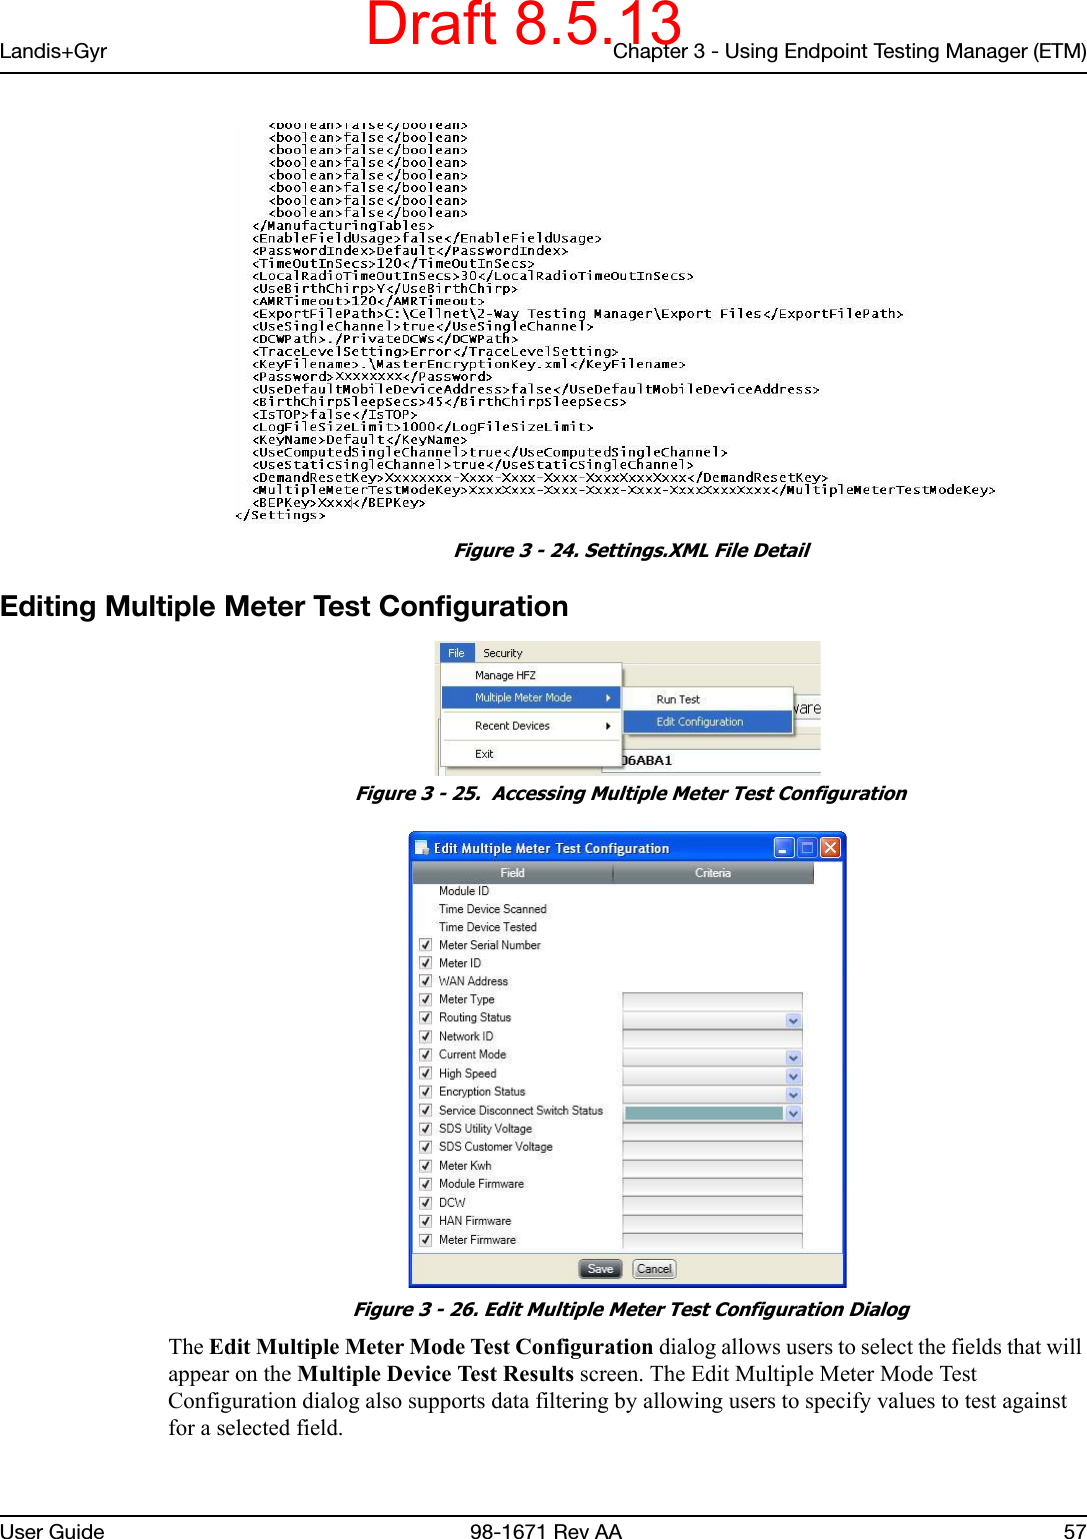 Landis+Gyr Chapter 3 - Using Endpoint Testing Manager (ETM)User Guide  98-1671 Rev AA 57 Figure 3 - 24. Settings.XML File DetailEditing Multiple Meter Test Configuration Figure 3 - 25.  Accessing Multiple Meter Test Configuration Figure 3 - 26. Edit Multiple Meter Test Configuration DialogThe Edit Multiple Meter Mode Test Configuration dialog allows users to select the fields that will appear on the Multiple Device Test Results screen. The Edit Multiple Meter Mode Test Configuration dialog also supports data filtering by allowing users to specify values to test against for a selected field. Draft 8.5.13